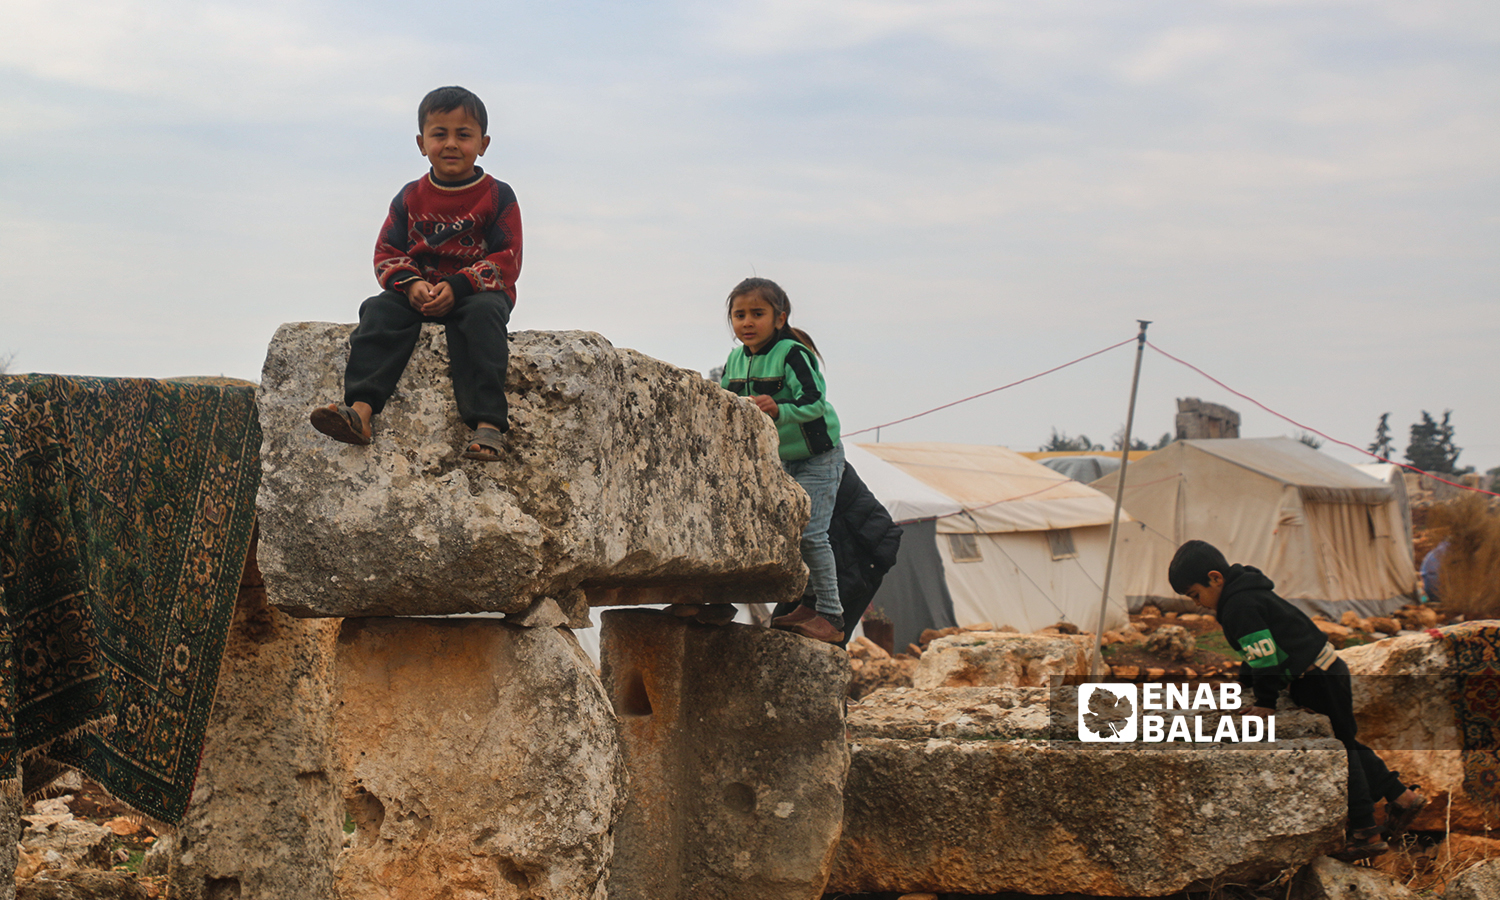 Displaced Syrian children playing near their tents, set up in an archeological site in the ancient Sarjableh area in the northern countryside of Idlib governorate - 22 January 2022 (Enab Baladi / Iyad Abdul Jawad)
